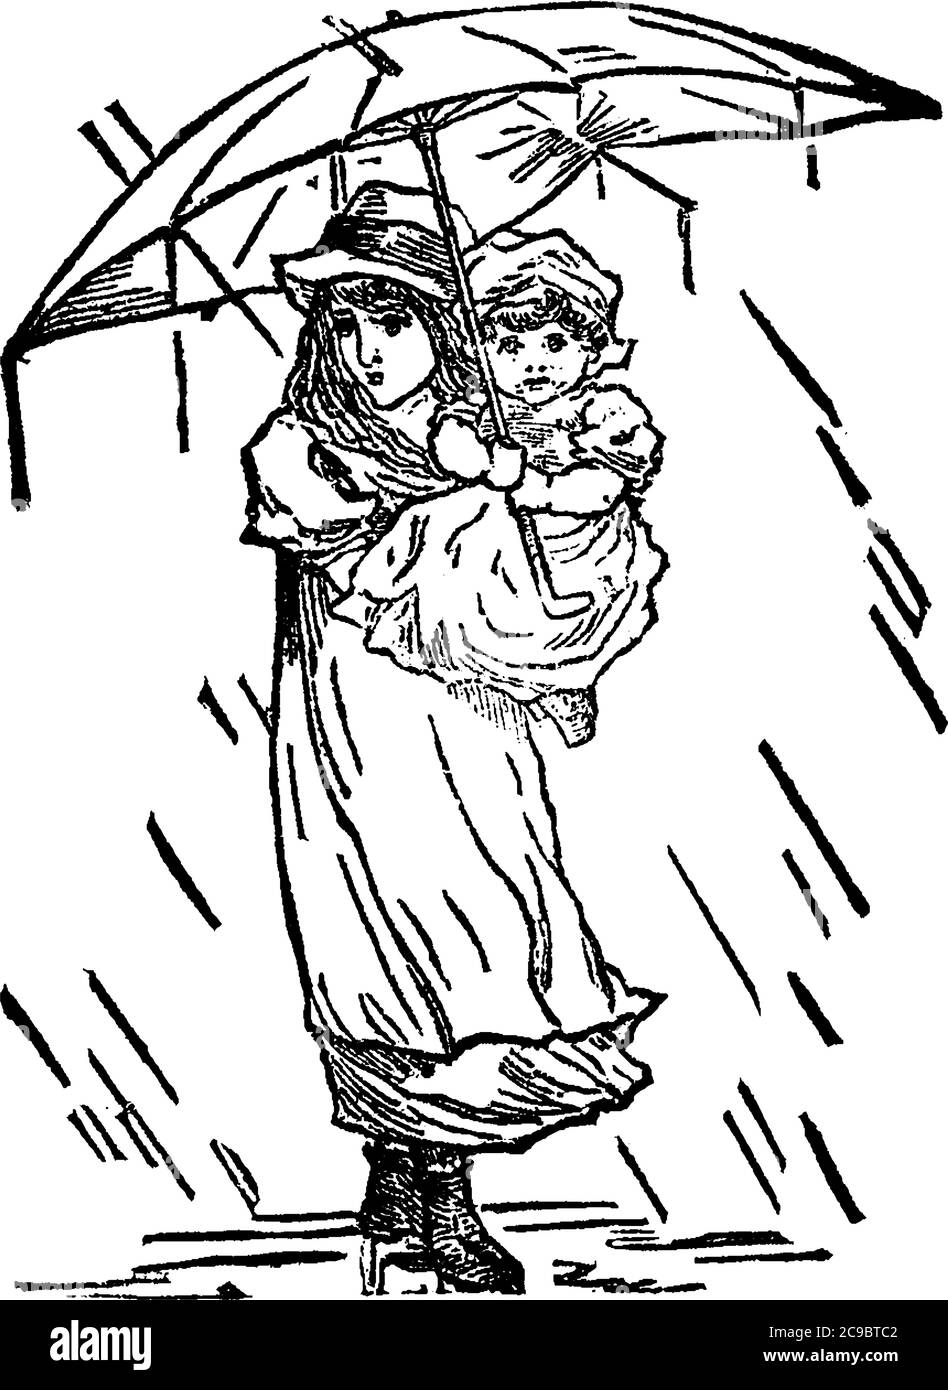 girl with umbrella drawing for kids